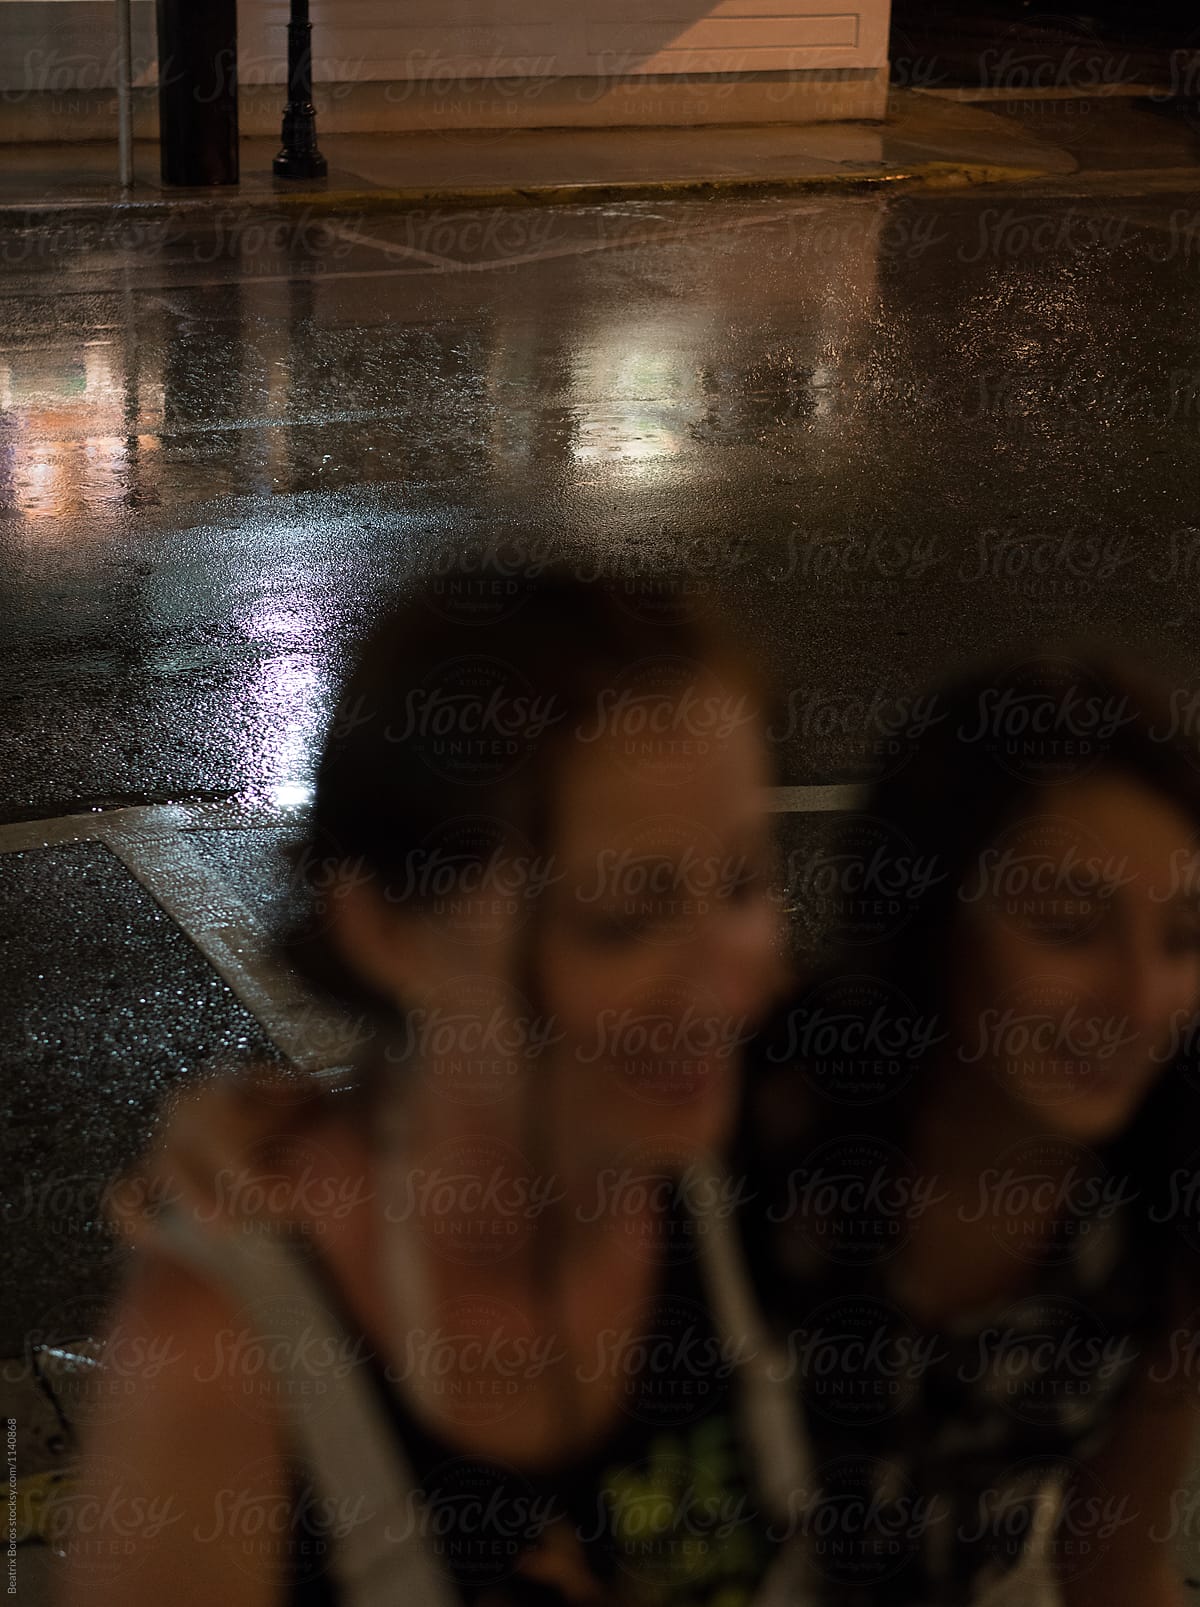 It\'s raining, two blurry people in the foreground